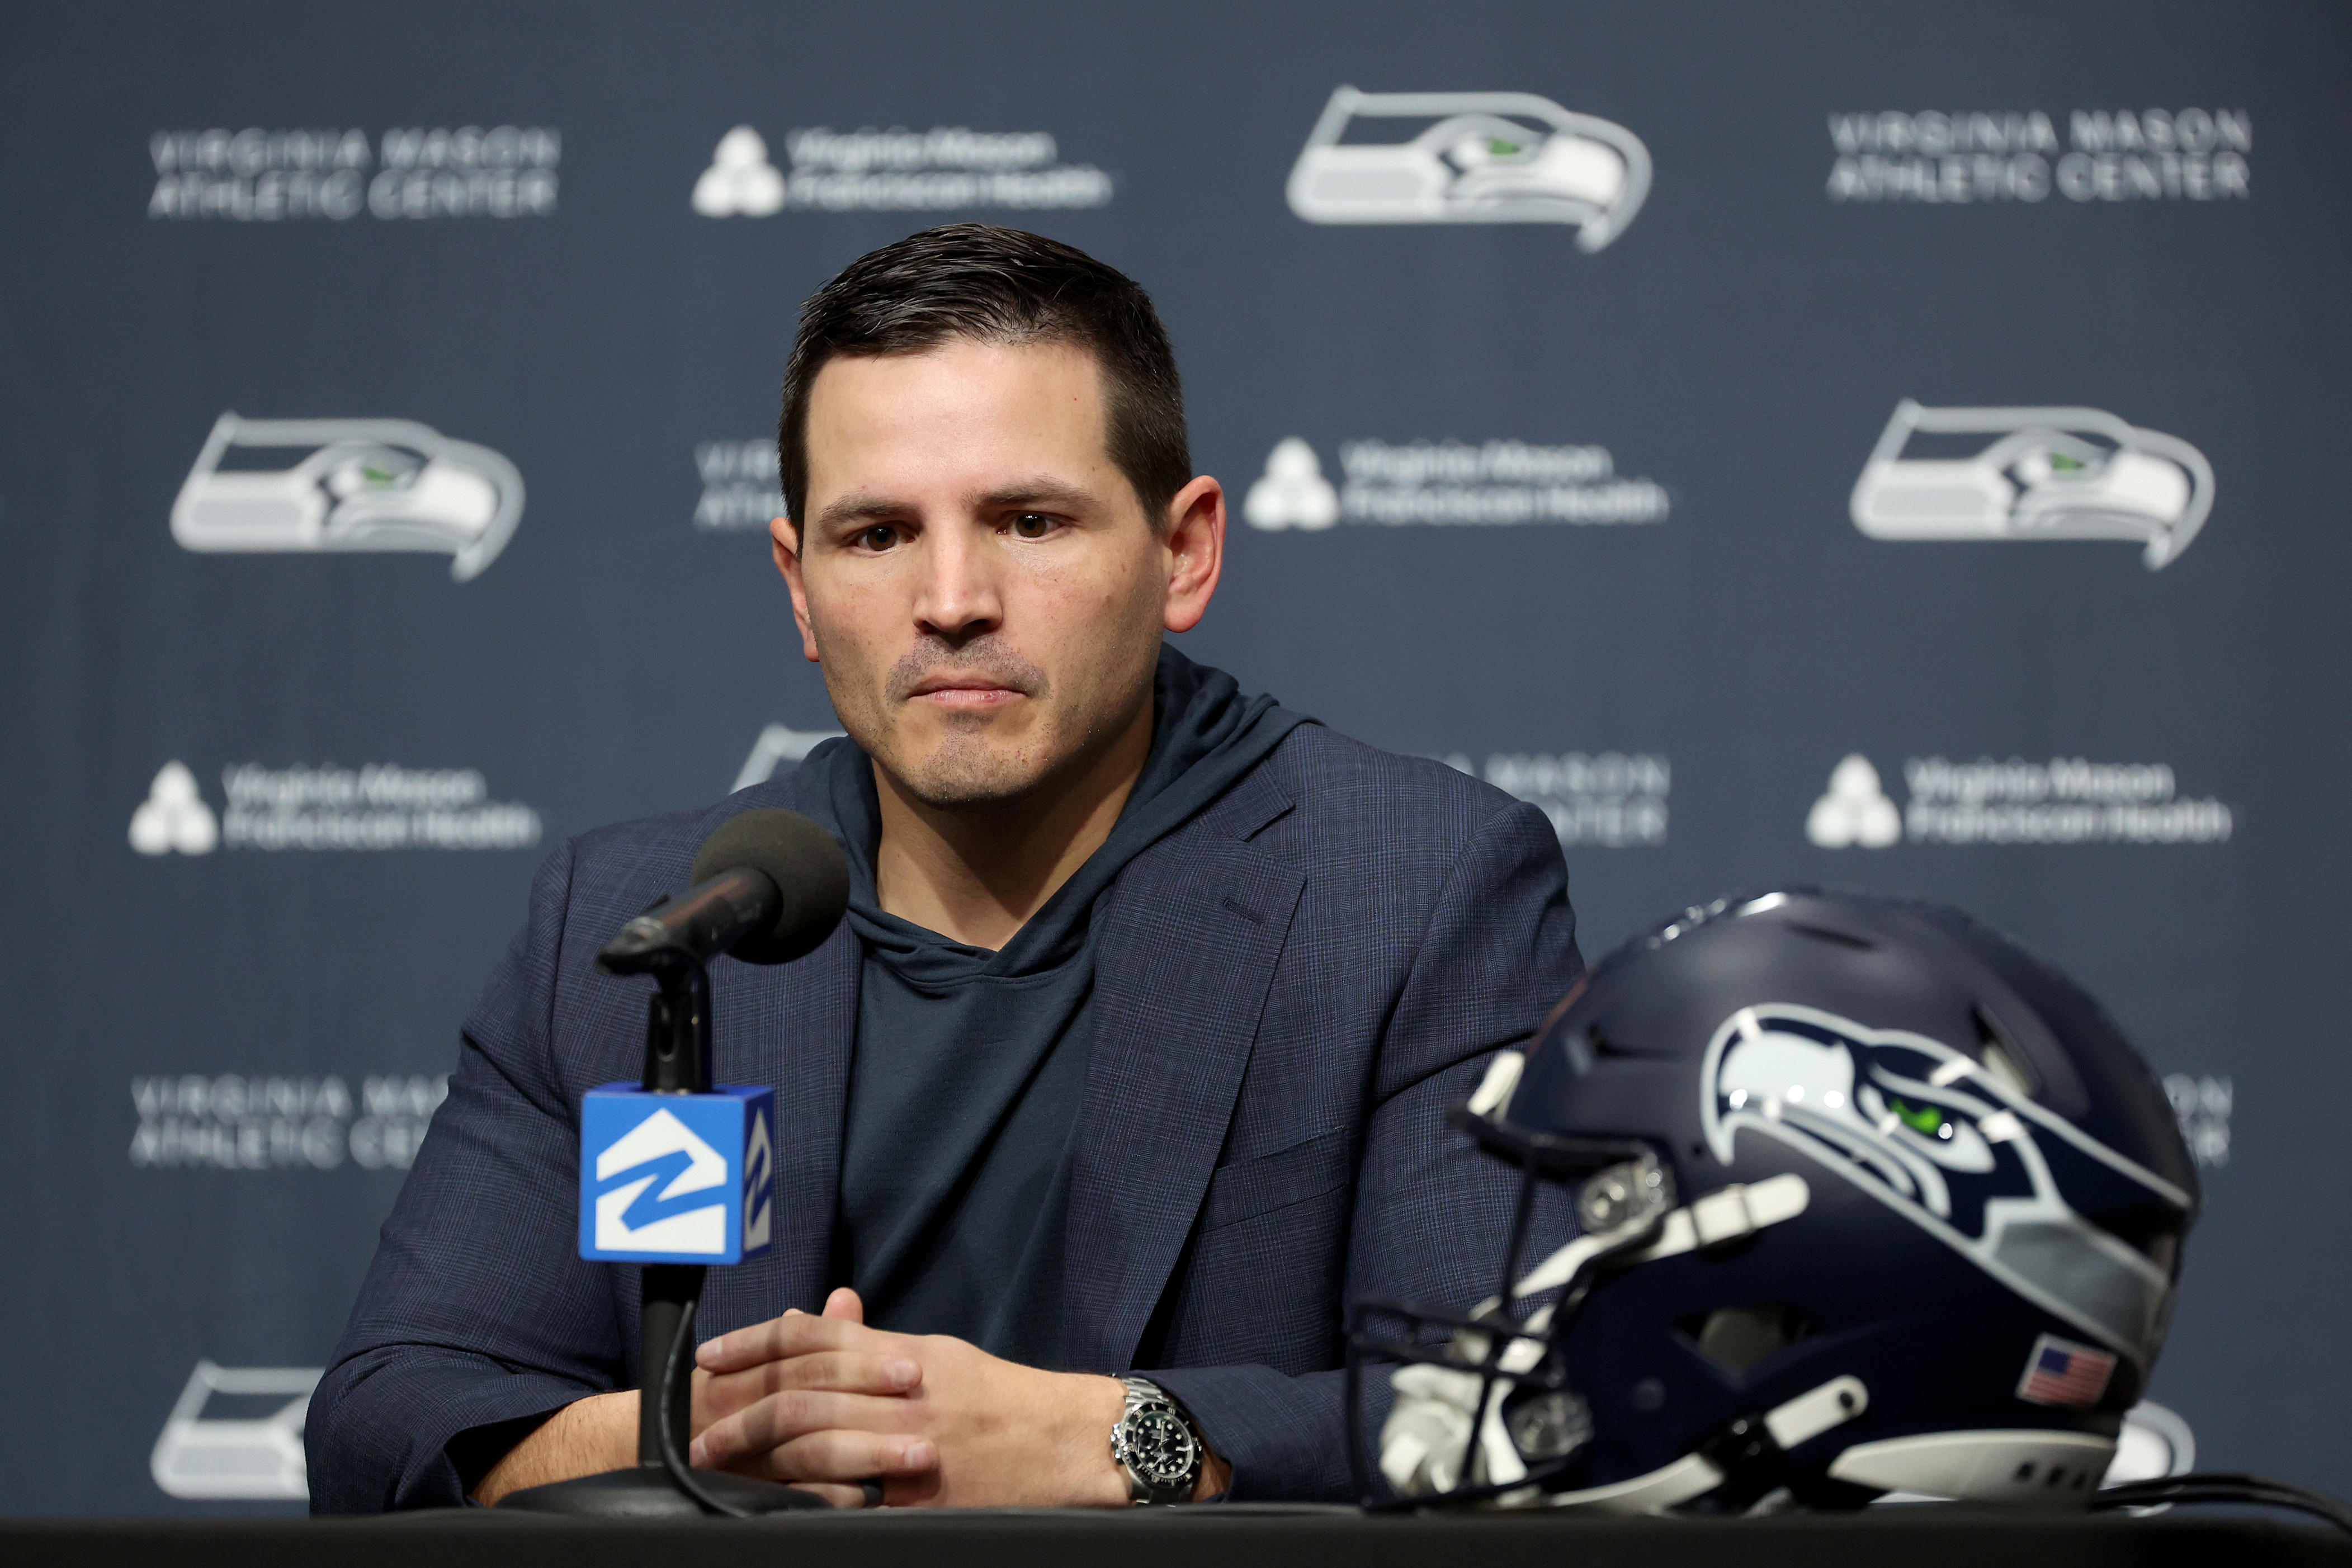 seahawks add 3 more assistant coaches to mike macdonald's staff